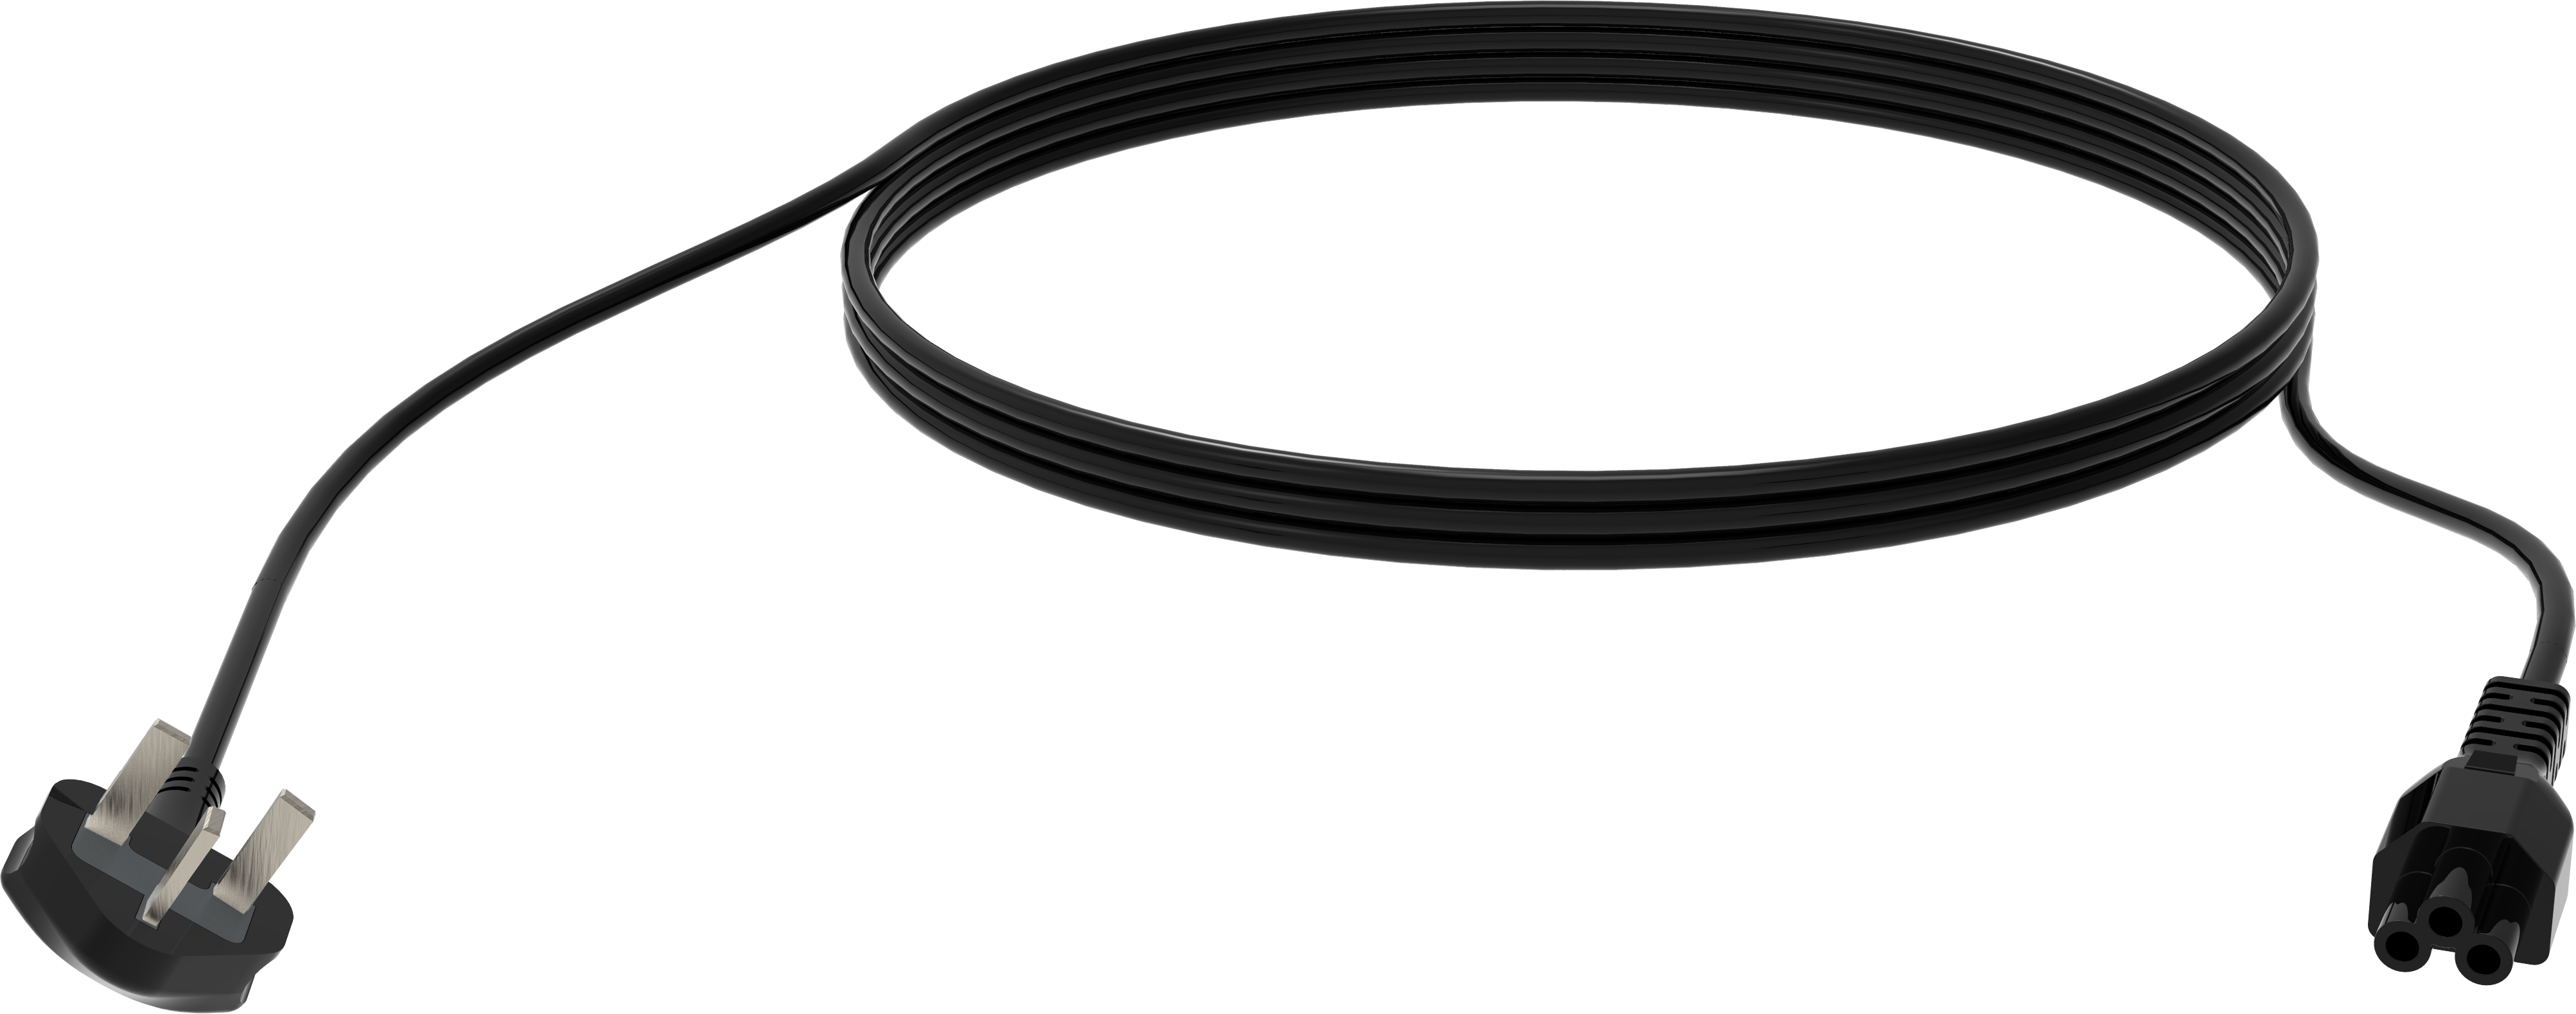 An image showing 3m Black UK Cloverleaf Power cable